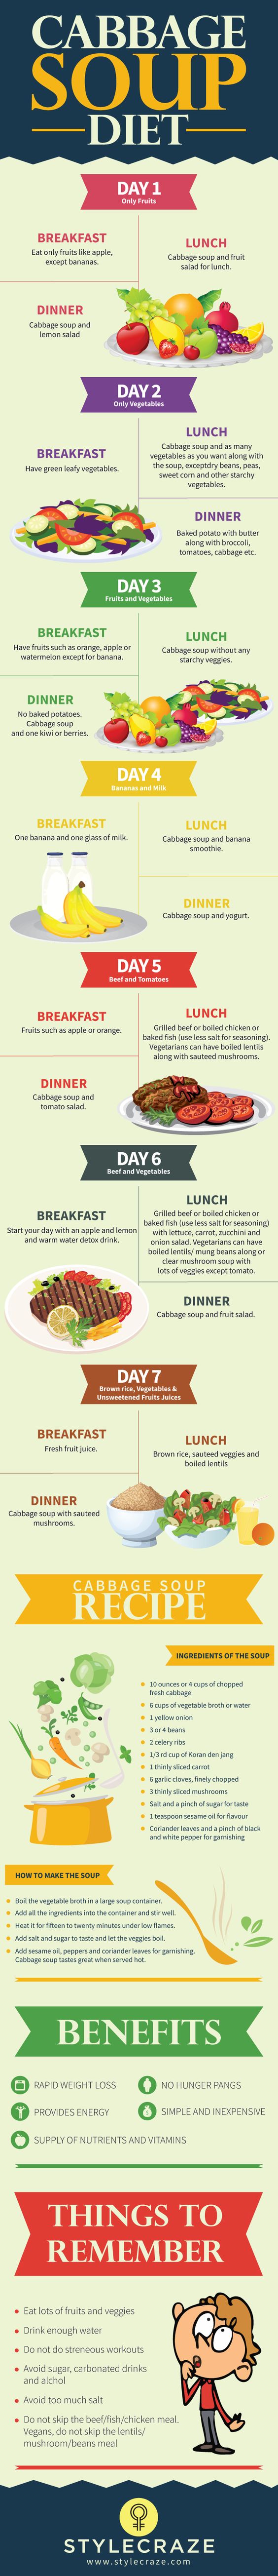 If you are in search of an effective diet that could help you reduce weight drastically, try the cabbage soup diet. Dieticians describe cabbage soup as a fad diet. This diet is extremely helpful for people who want to quickly shed weight. Learn all about it in this infographic from StyleCraze.